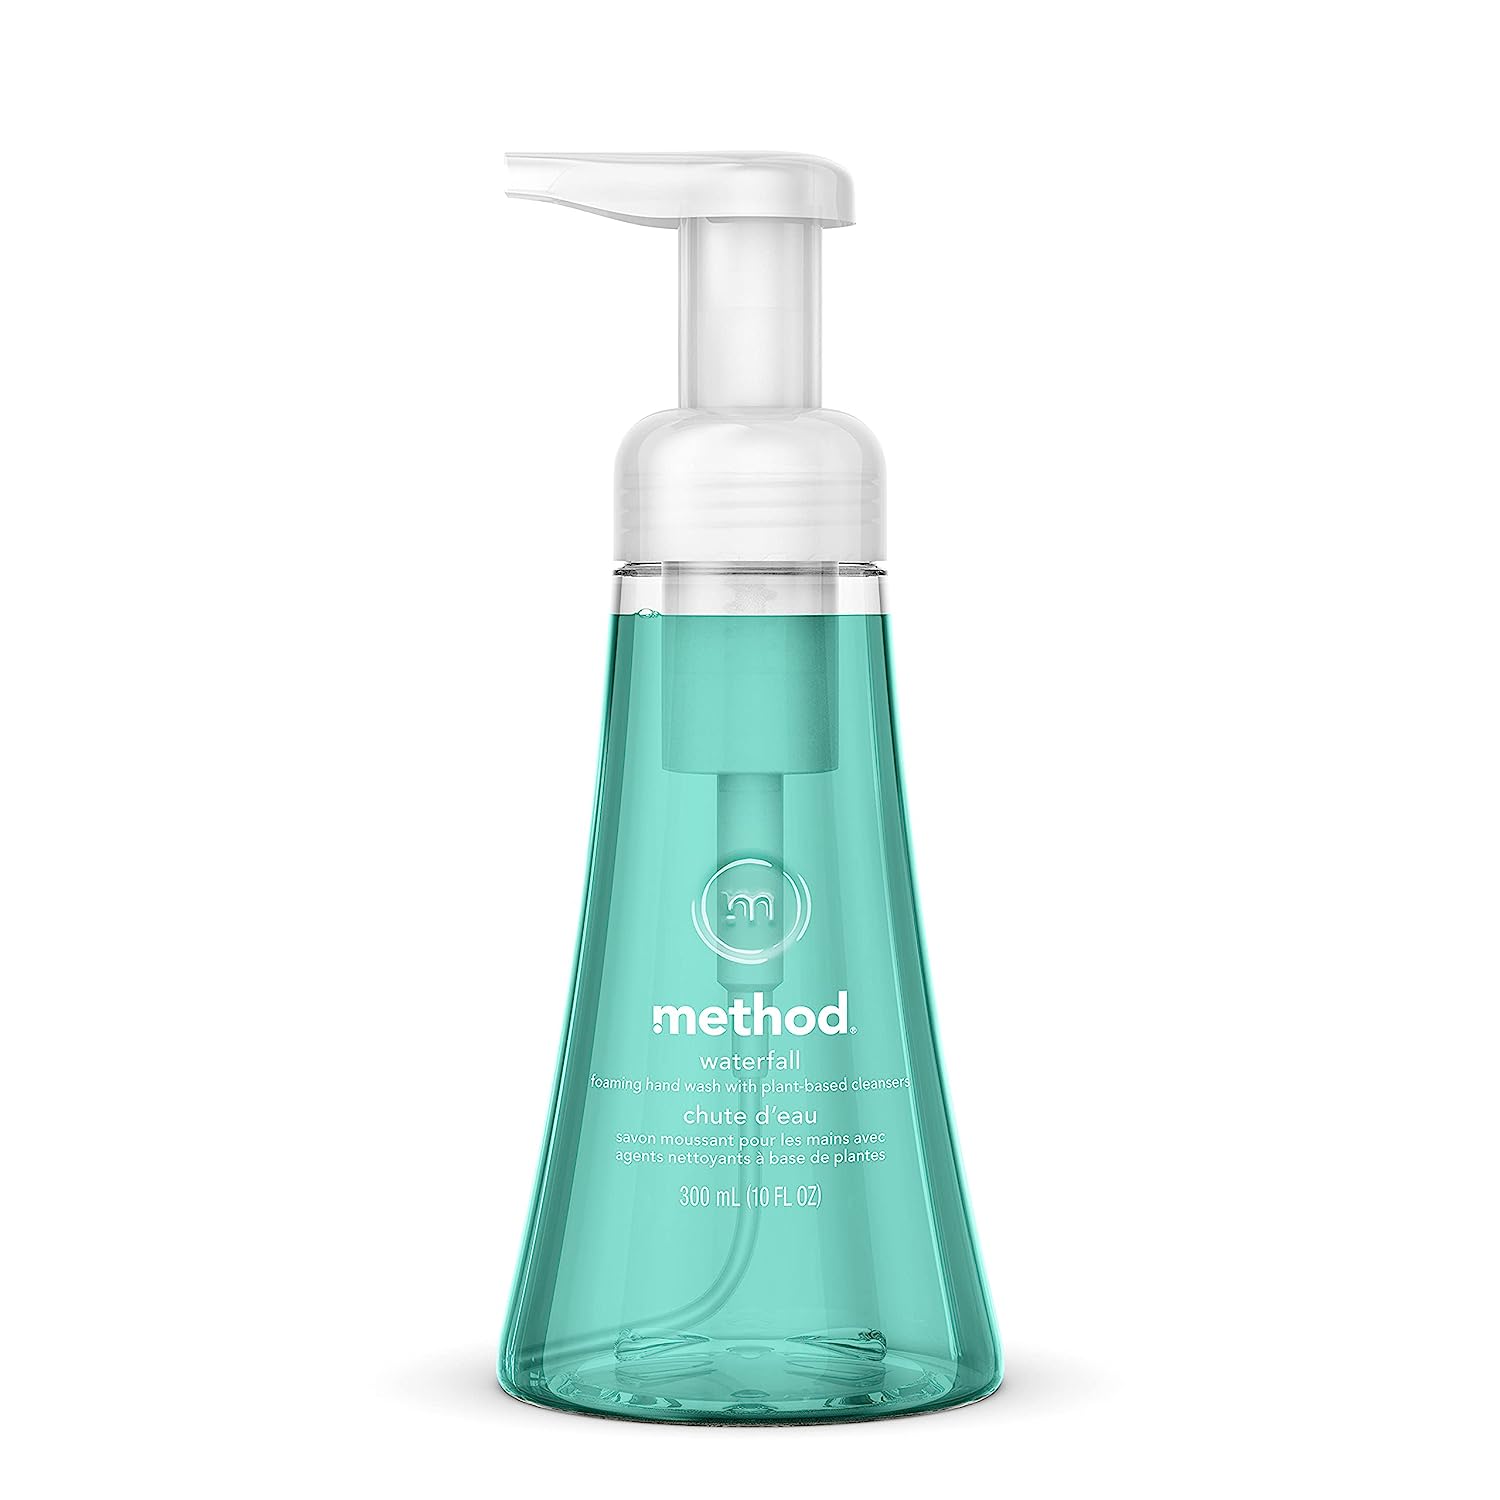 10-Oz Method Foaming Biodegradable Hand Soap (Waterfall) $2.25 + Free Shipping w/ Prime or on $25+